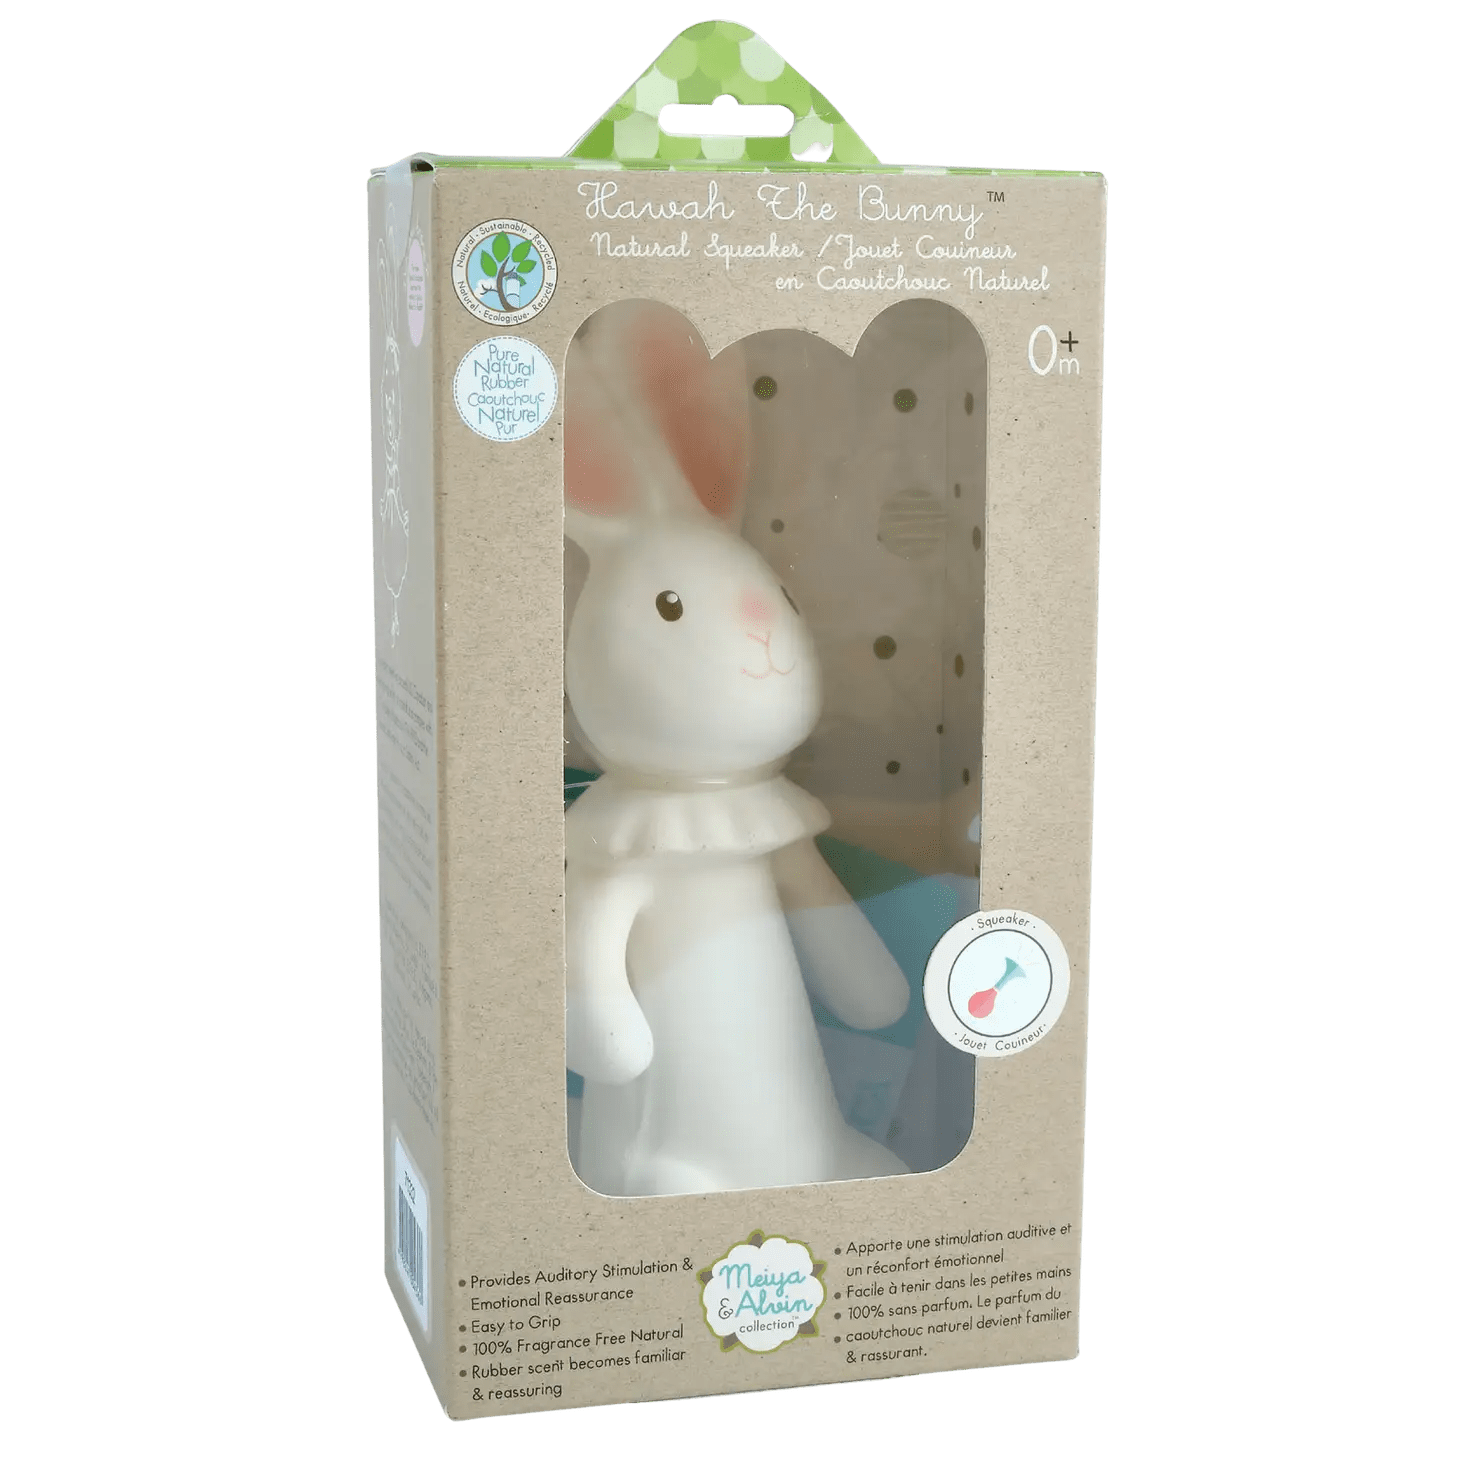 Havah the Bunny Organic Natural Rubber Squeaker Toy Tikiri Toys Lil Tulips